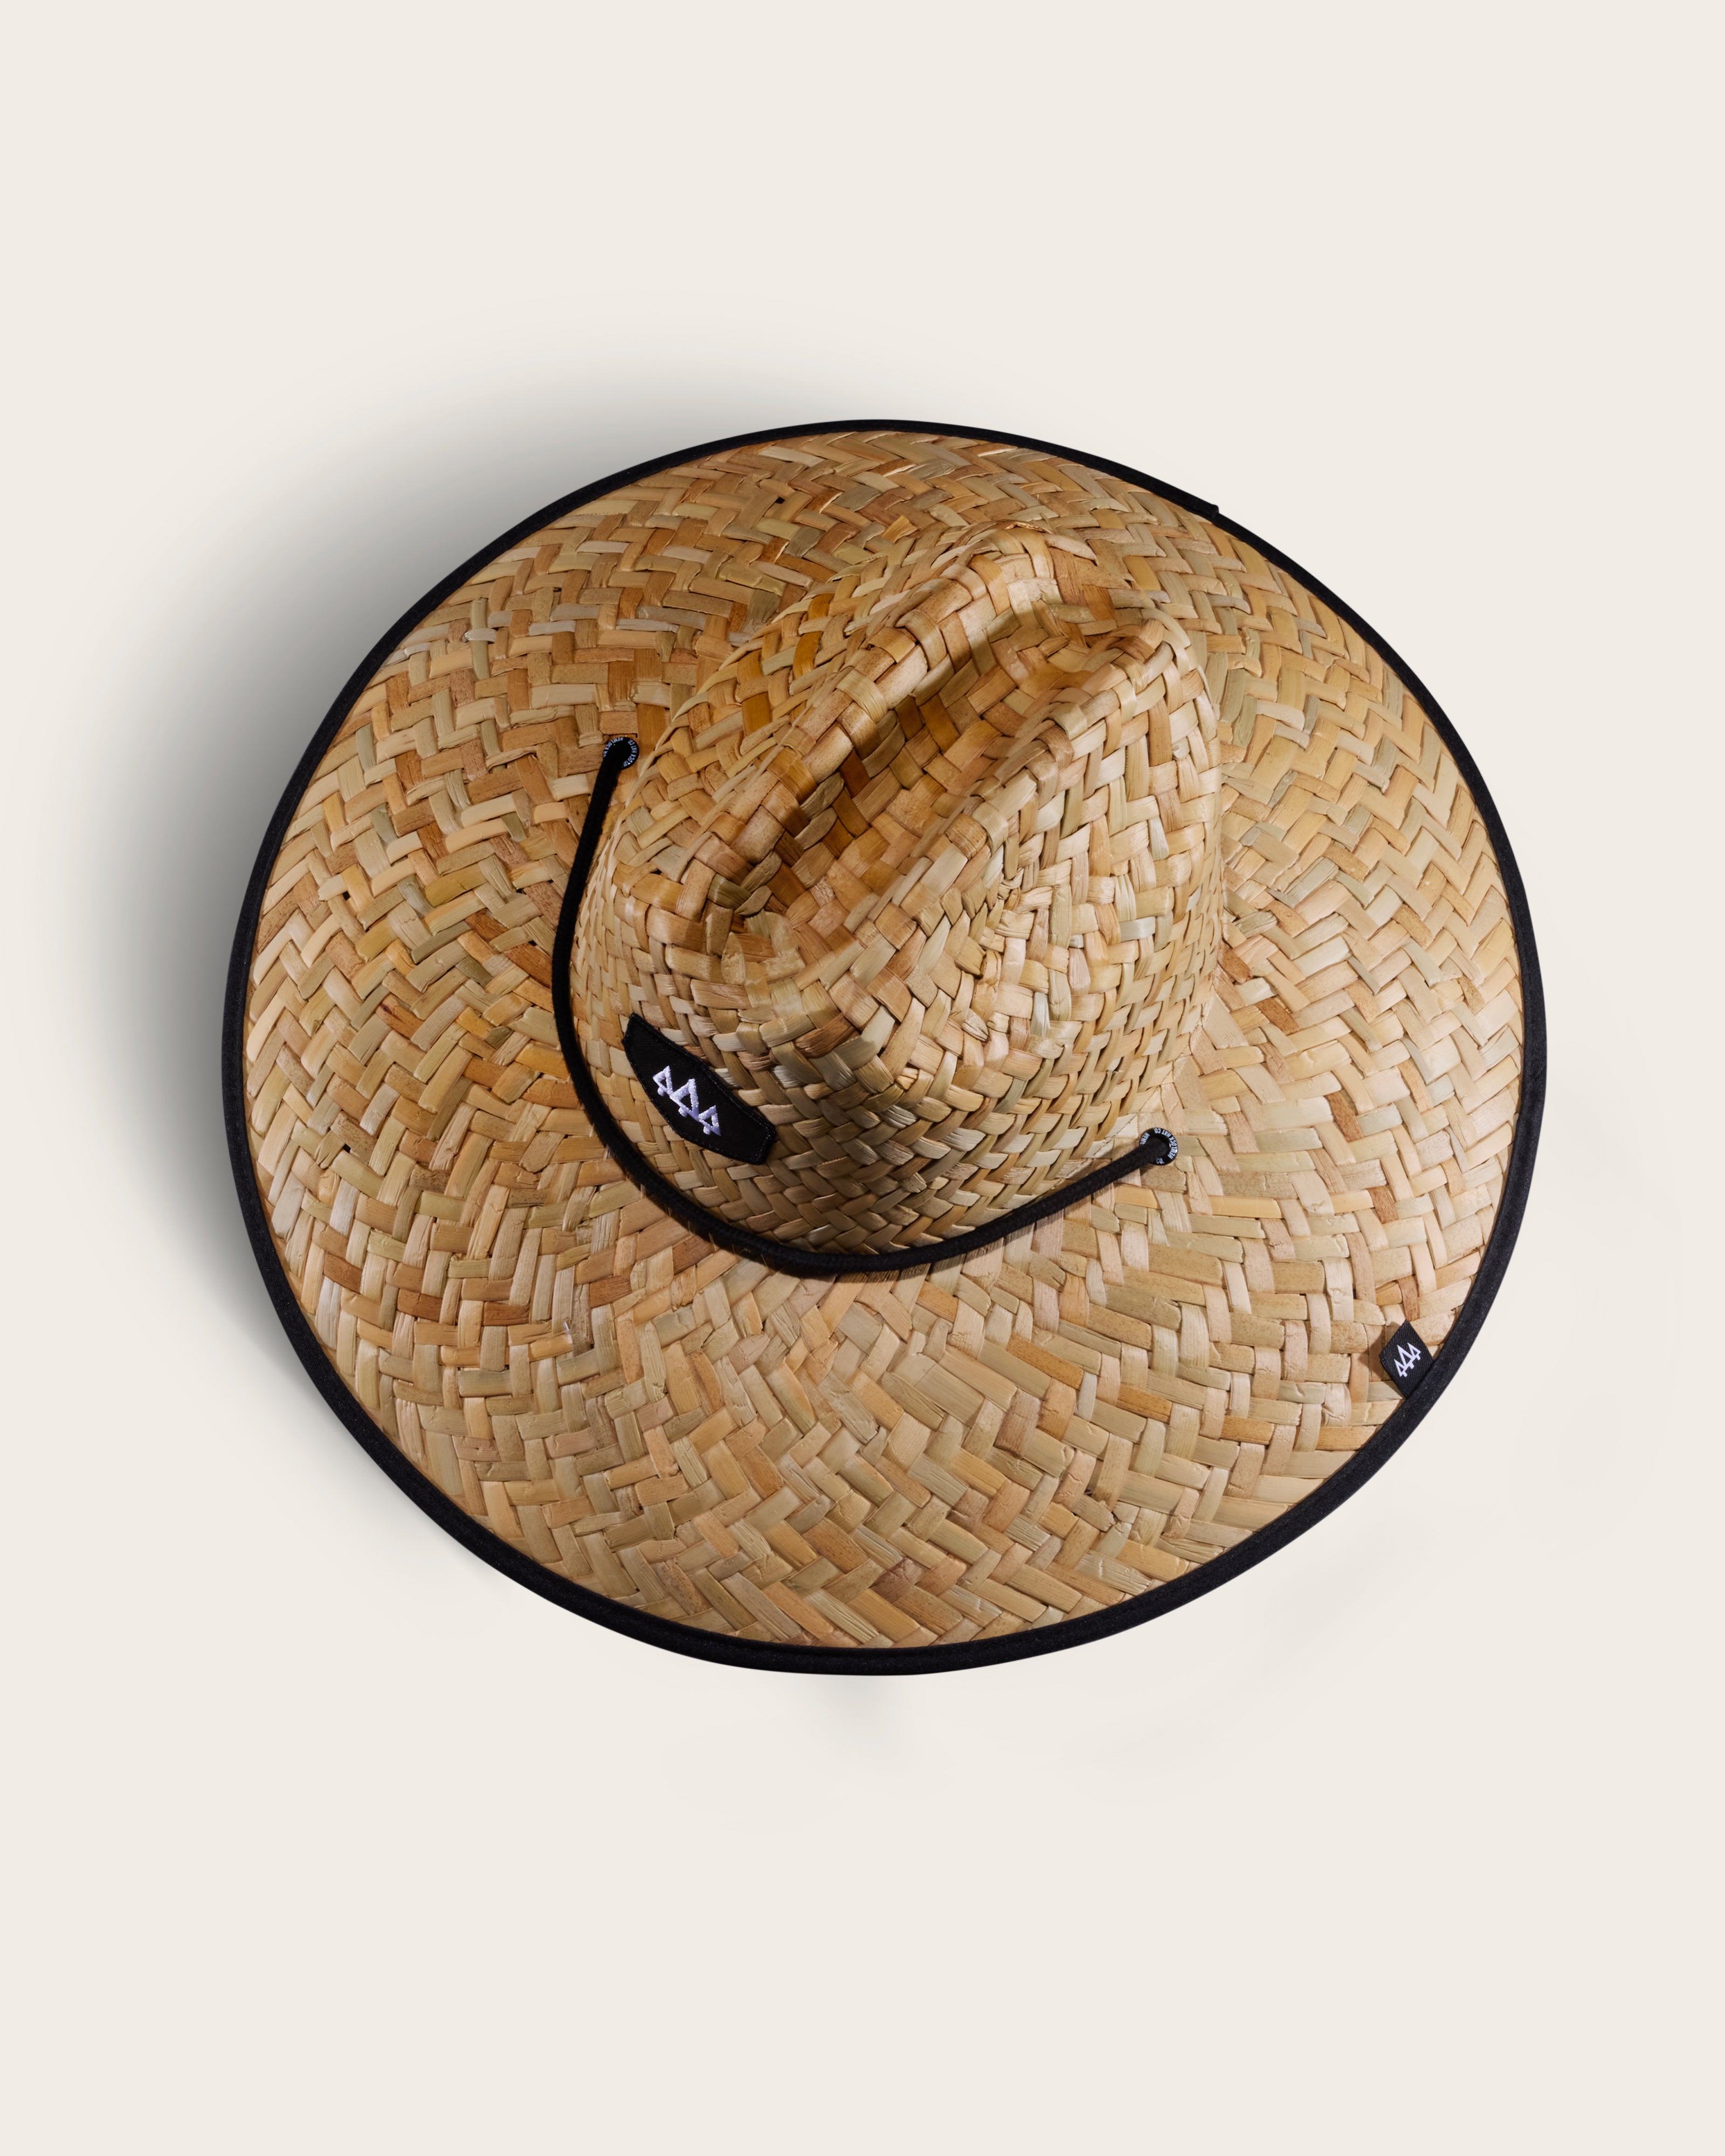 Hemlock Blackout straw lifeguard hat with Black color top of hat